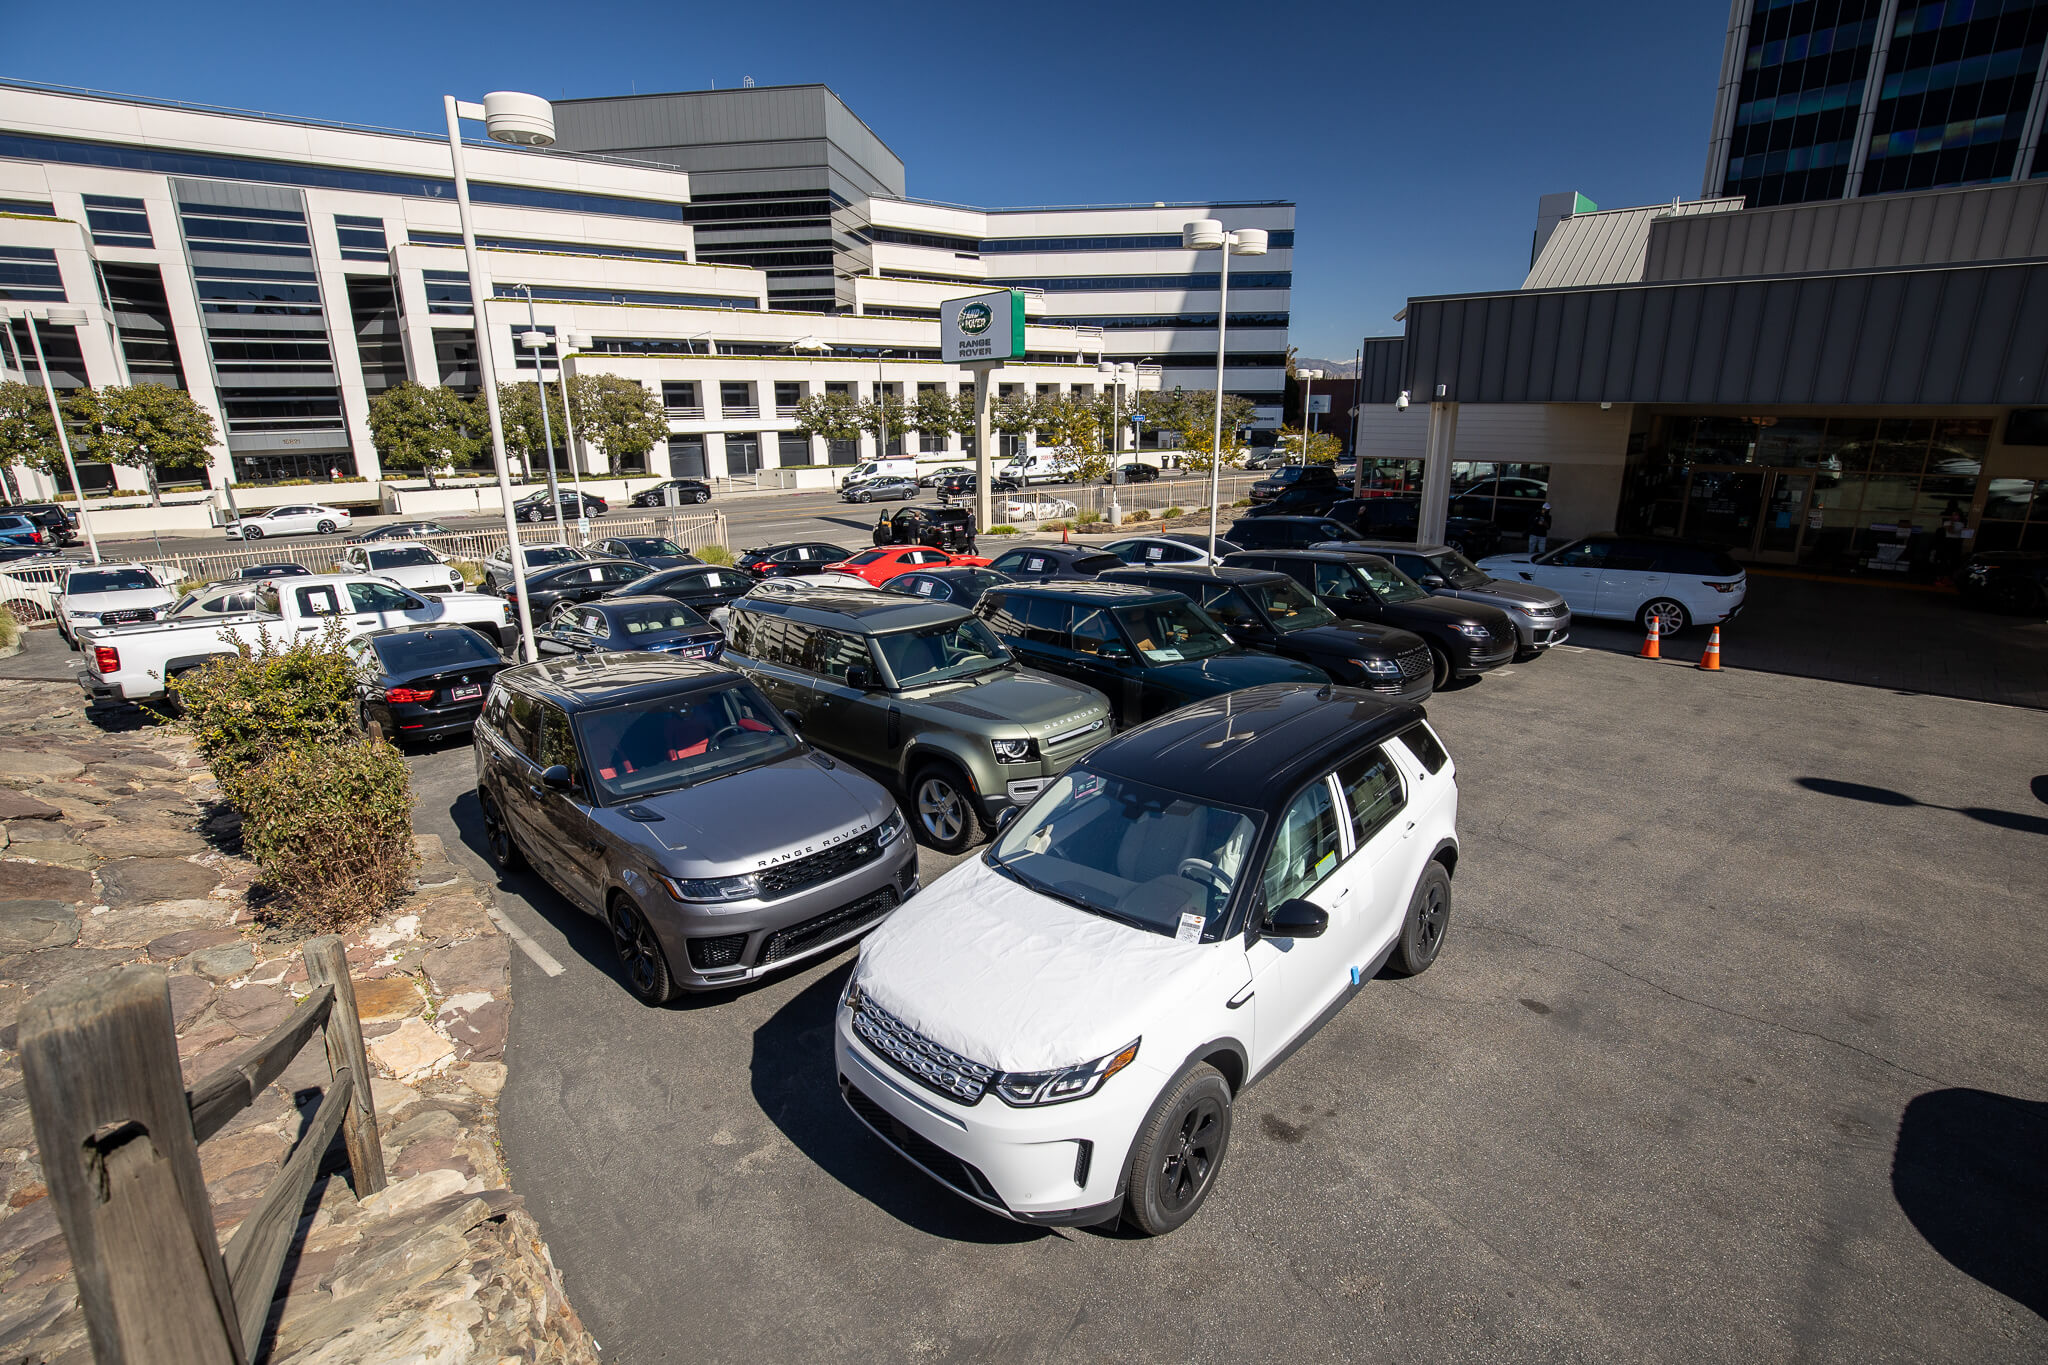 Exterior view of the Land Rover Encino lot